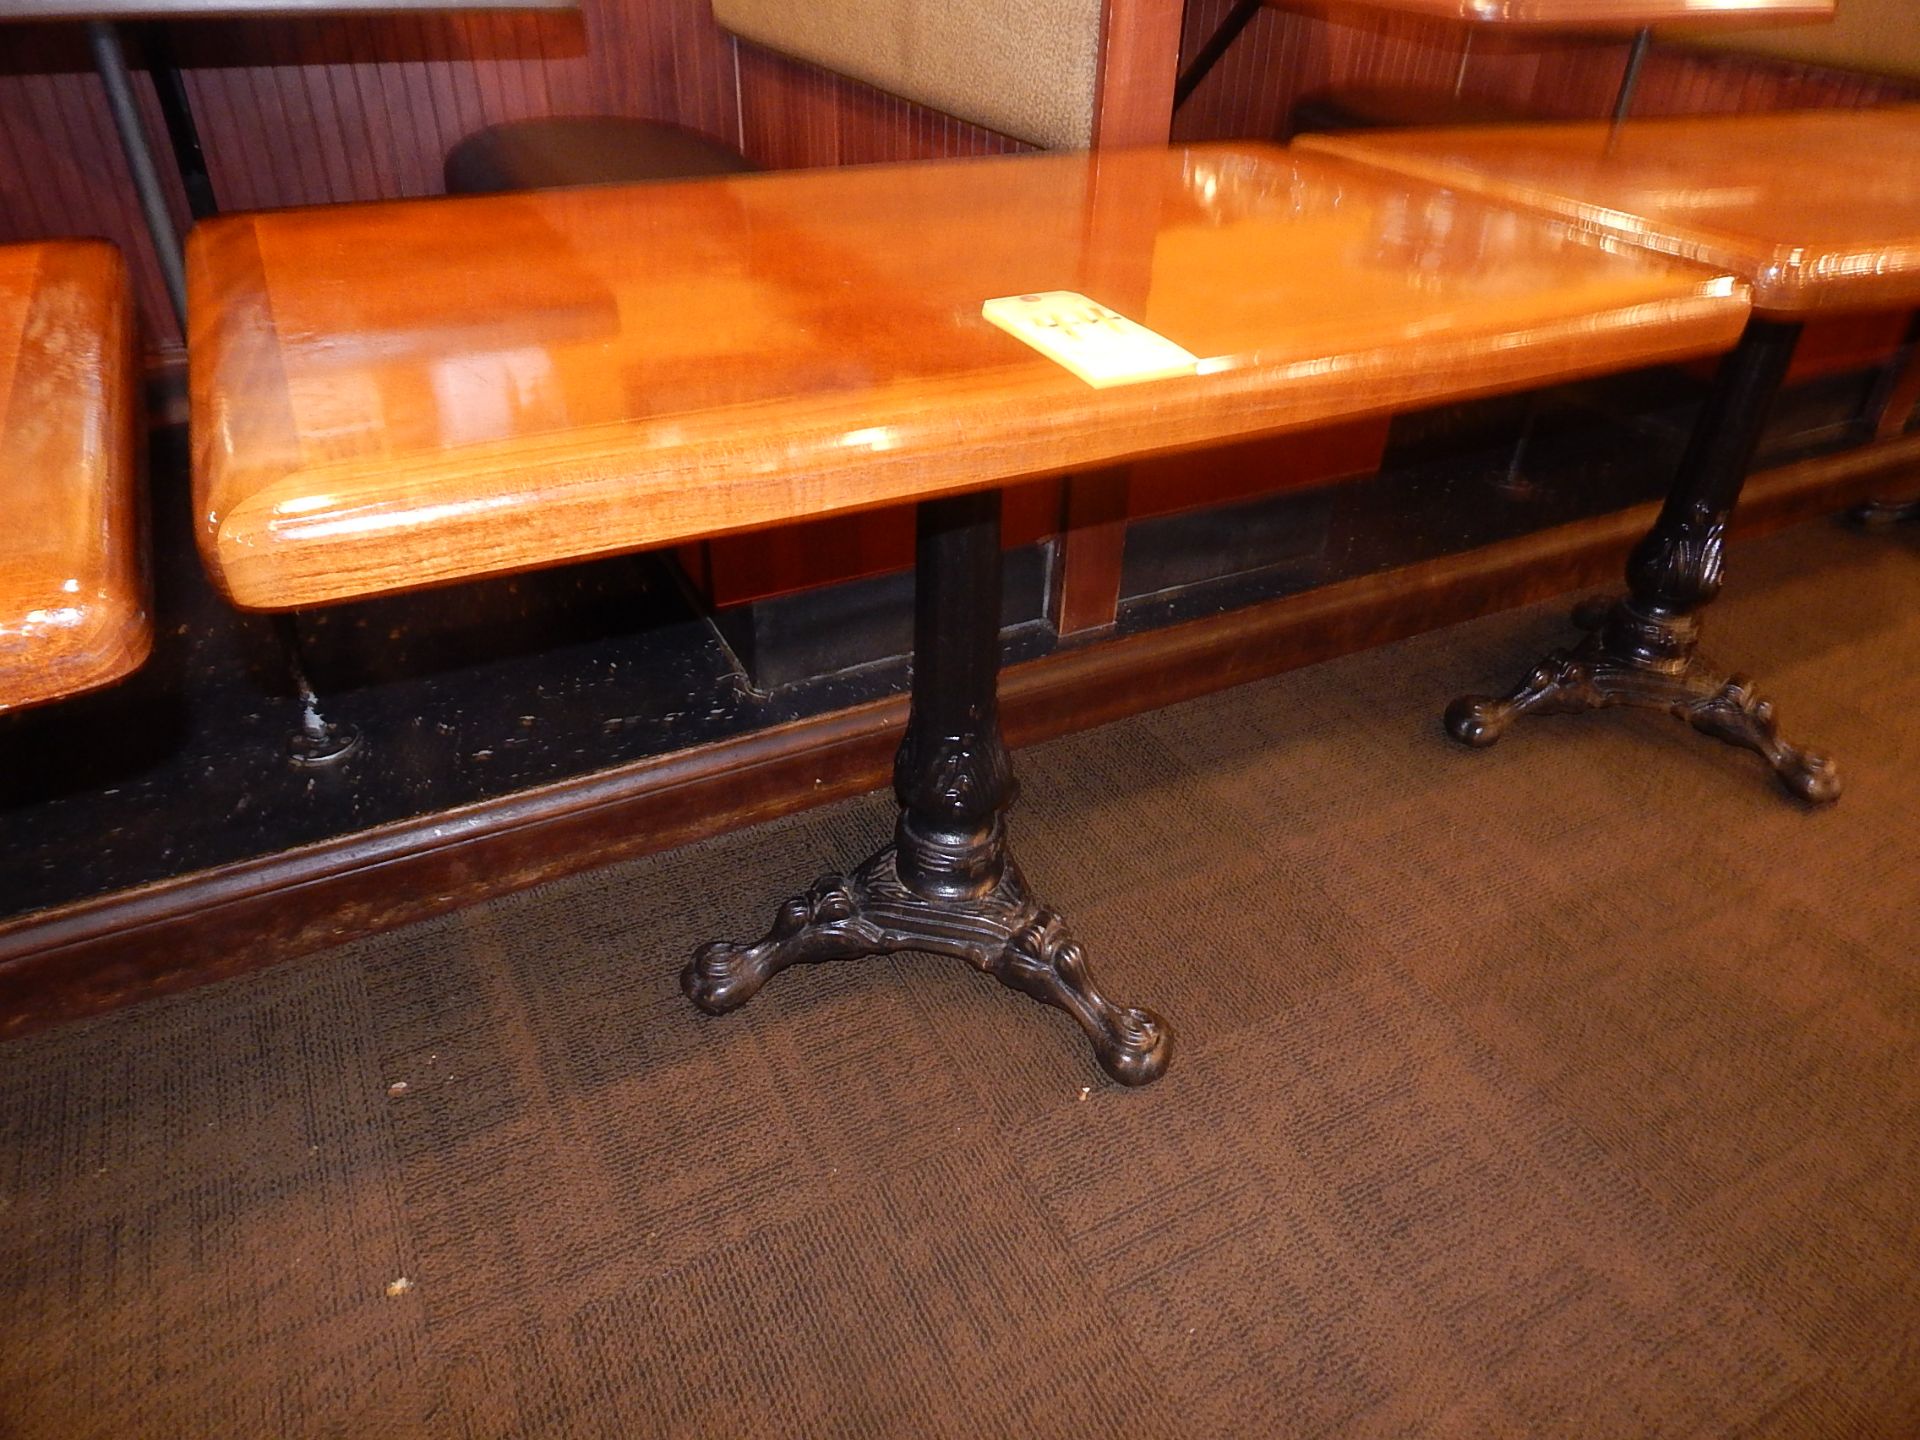 Rectangular Wood-Top Table with Cast Iron Claw Foot Pedestal Base, 24" x 42"